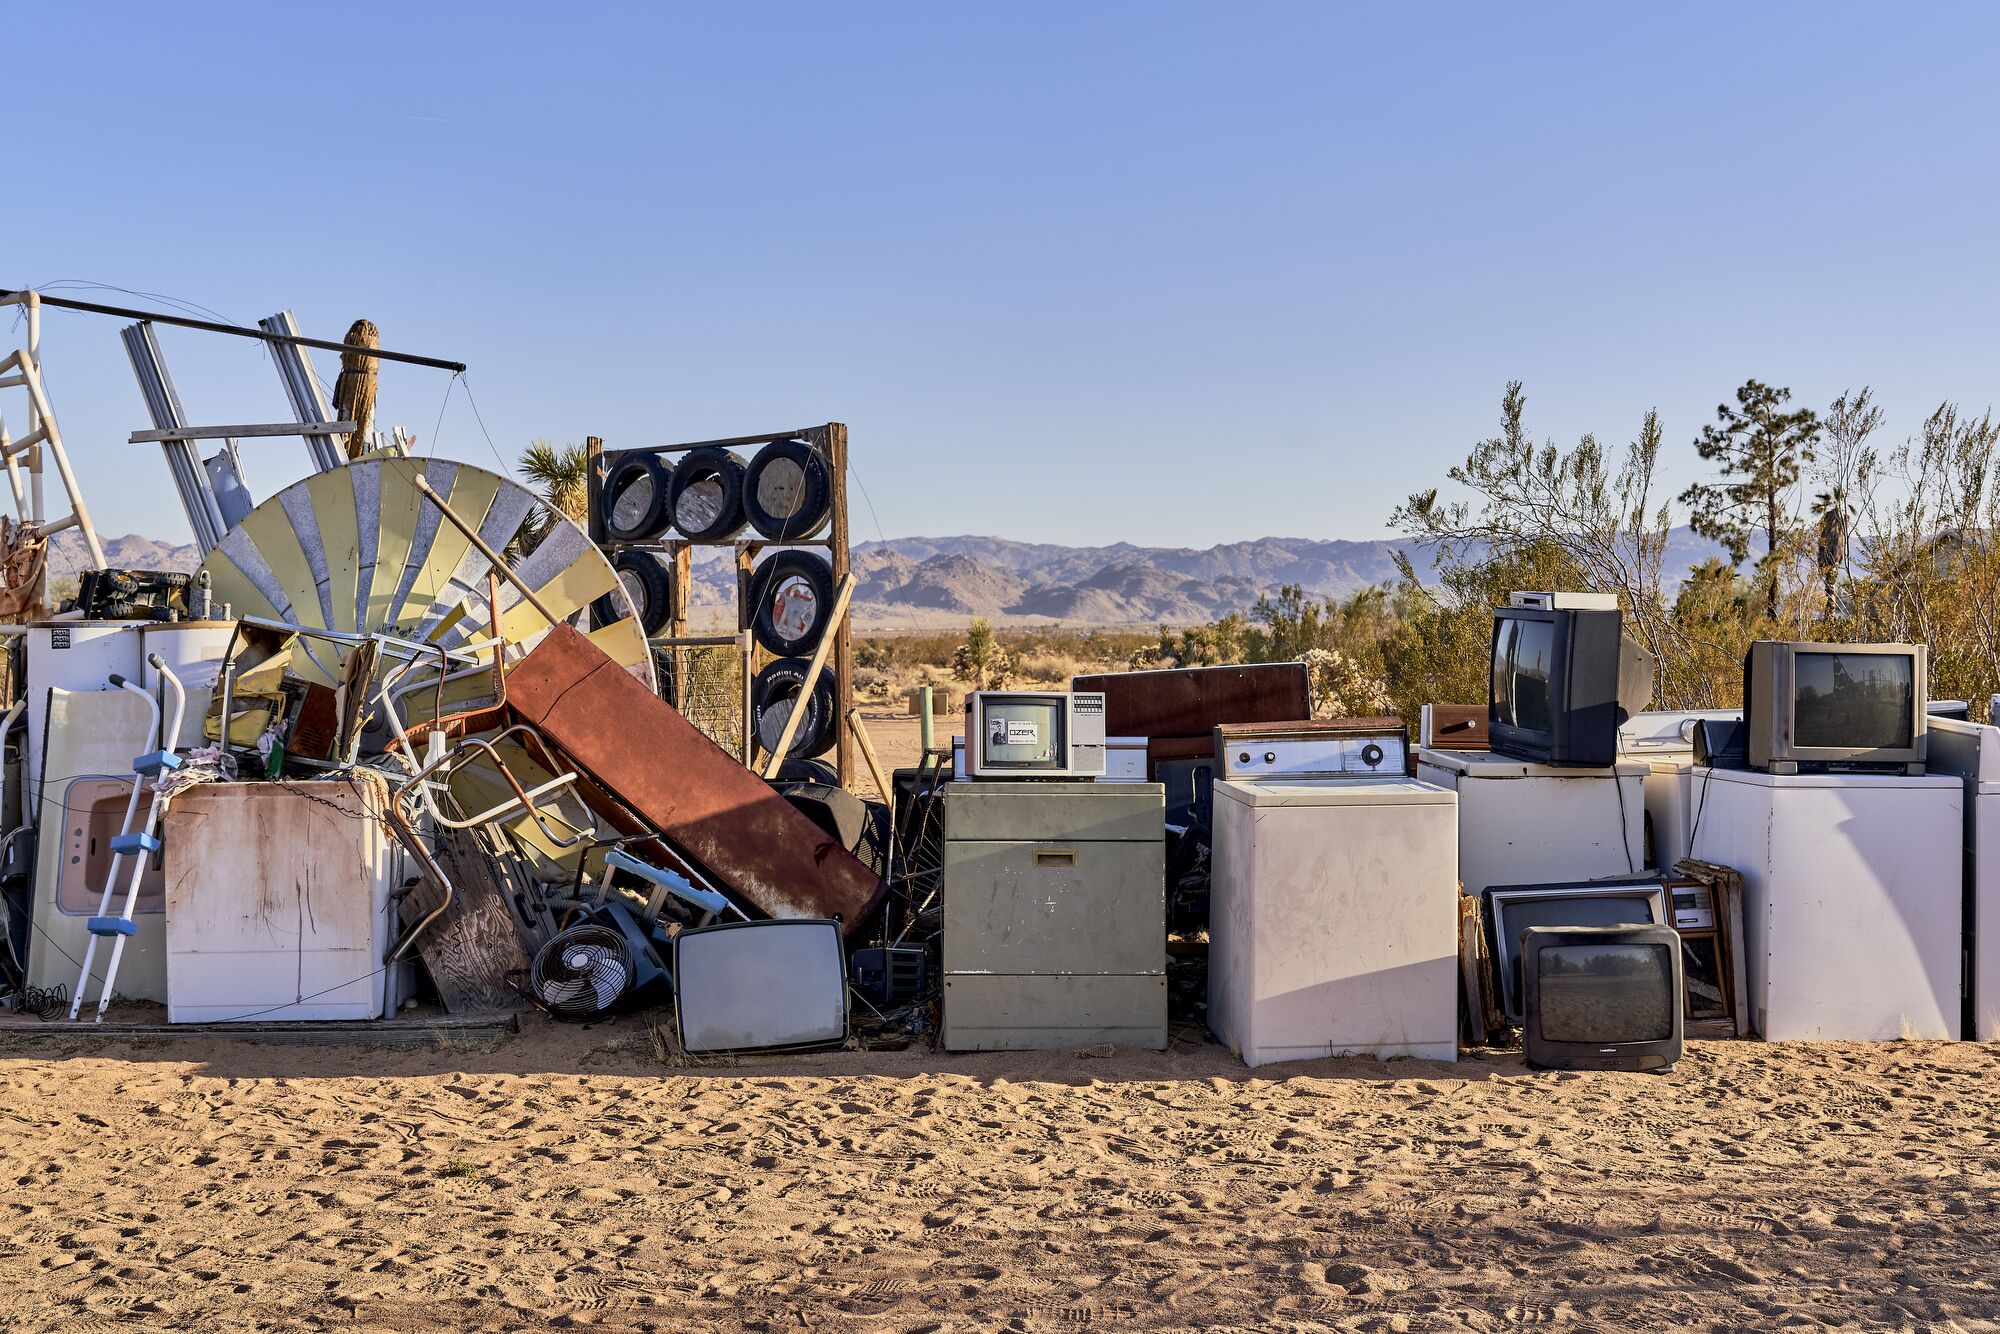 “Everything and the Kitchen Sink, 1996” at the Noah Purifoy Outdoor Desert Art Museum.